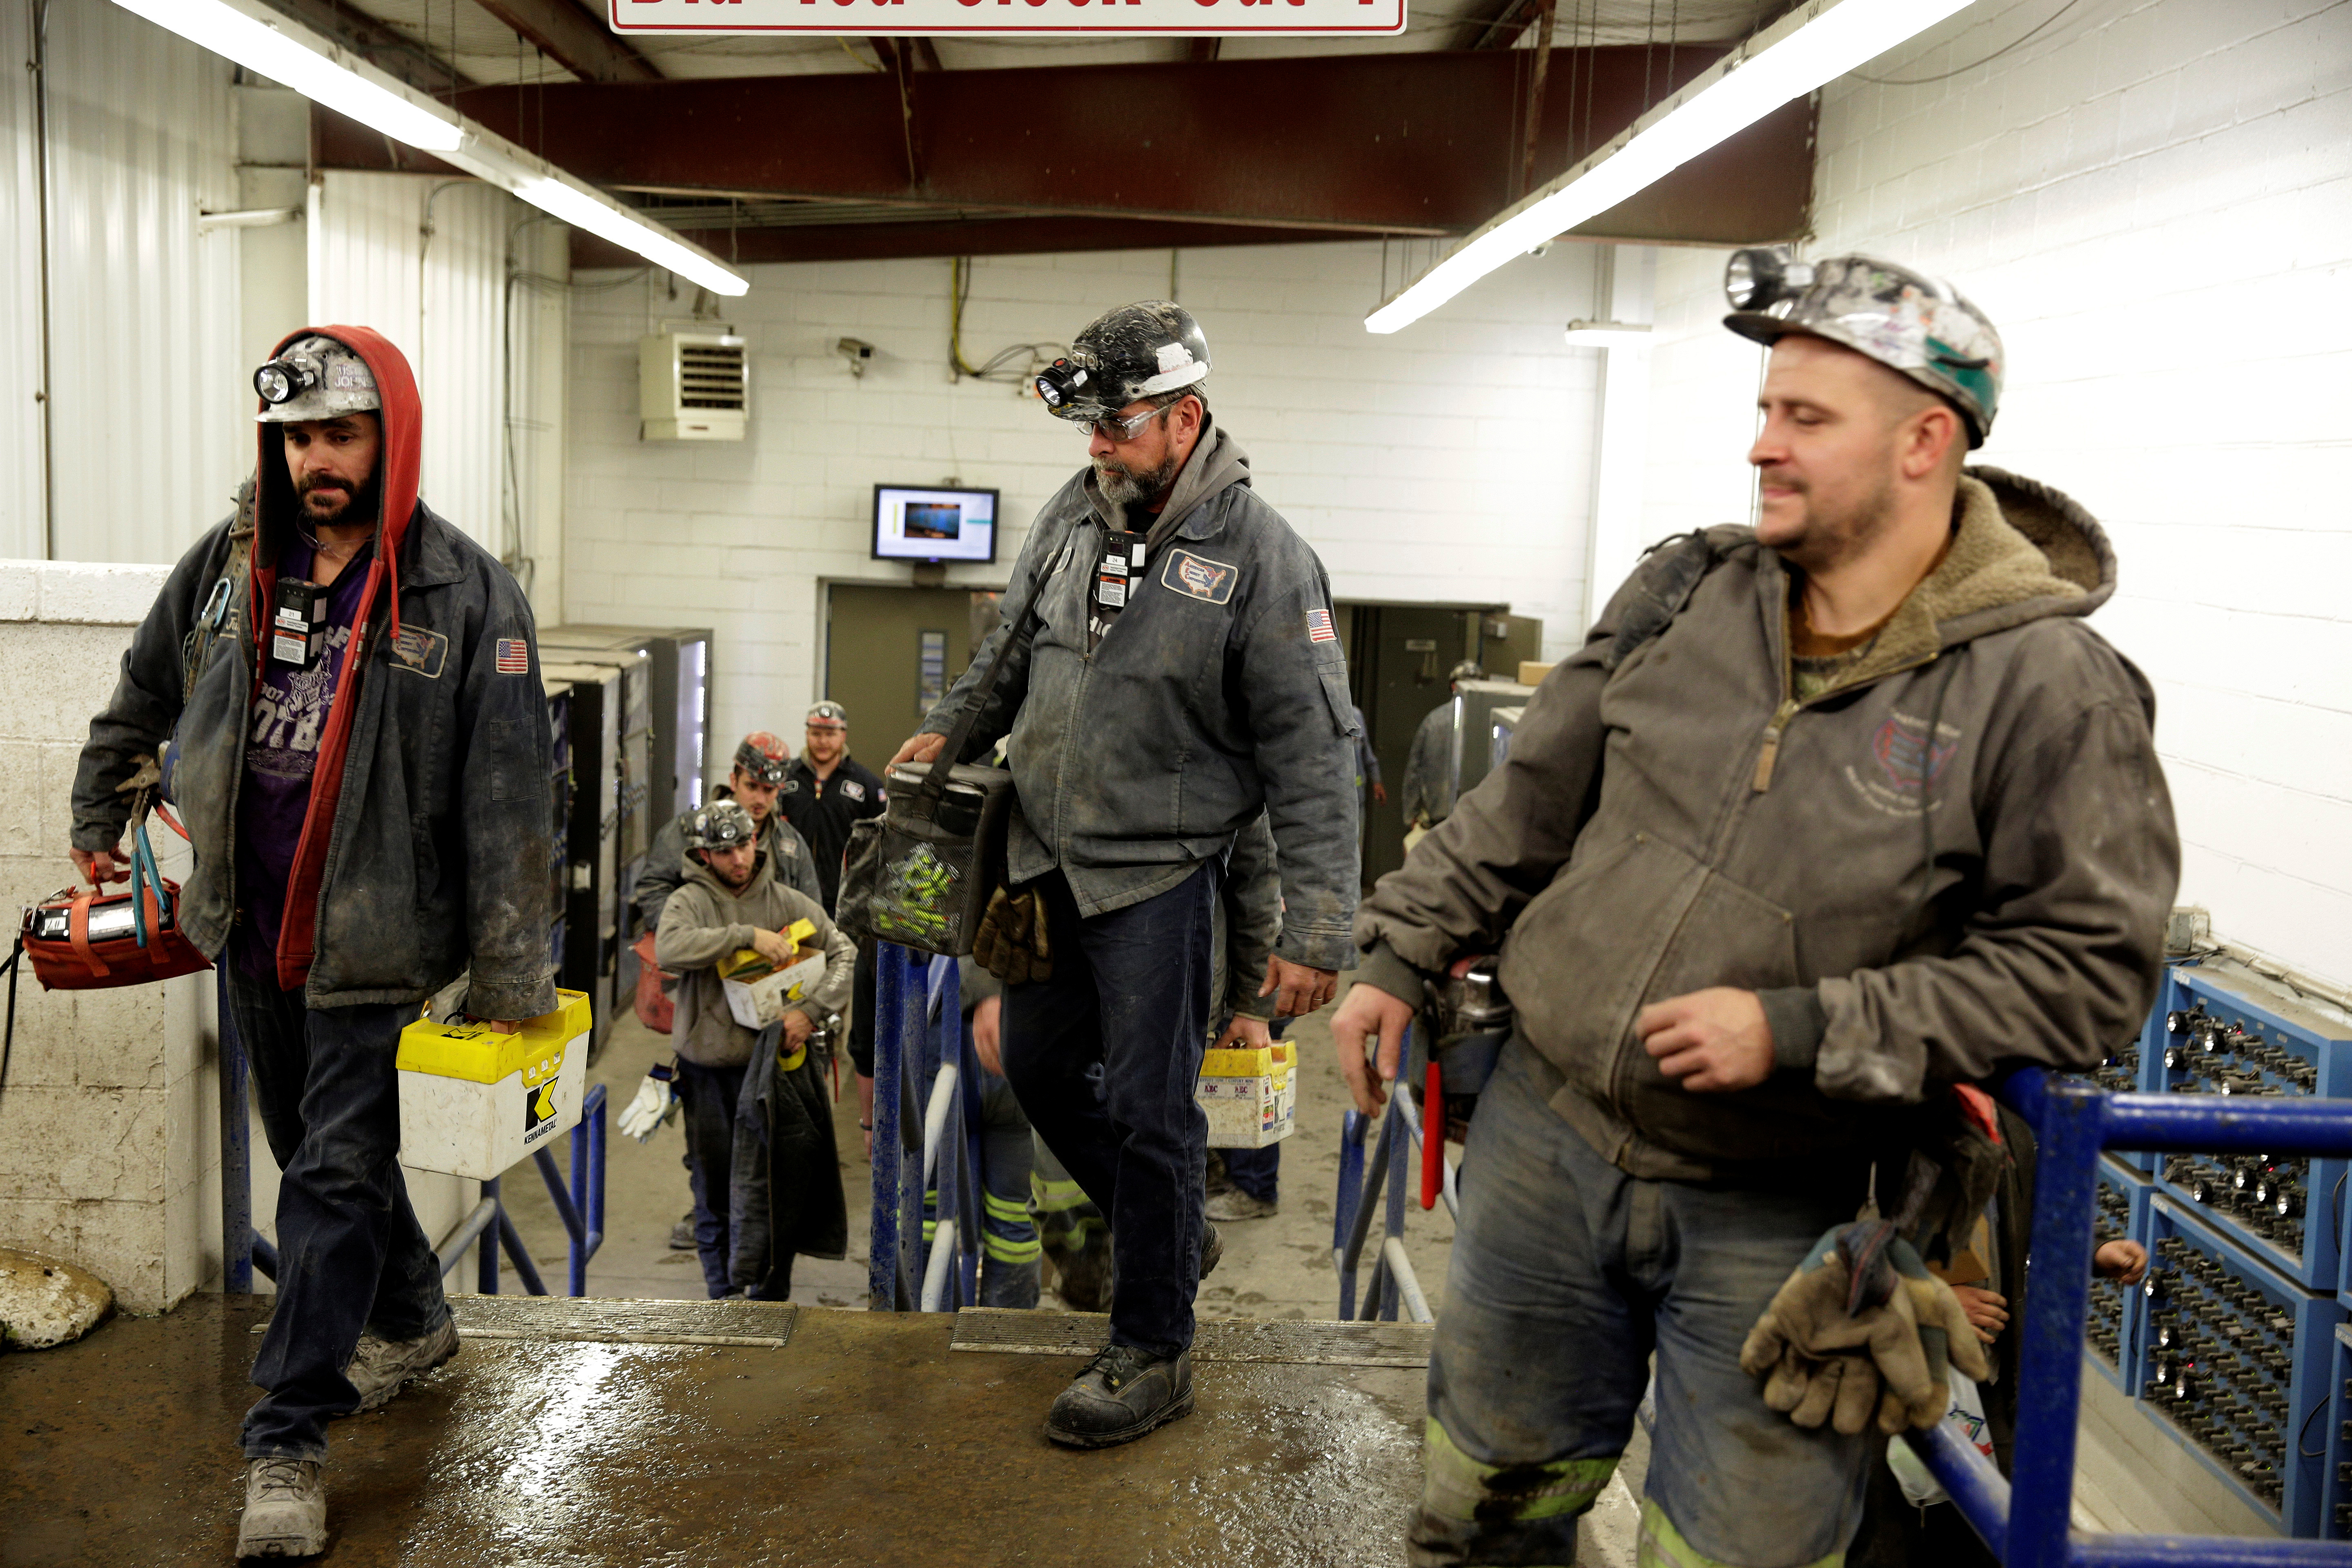 Miners arrives for the start of their shift at the American Energy Corporation Century Mine in Beallsville, Ohio, November 7, 2017. REUTERS/Joshua Roberts